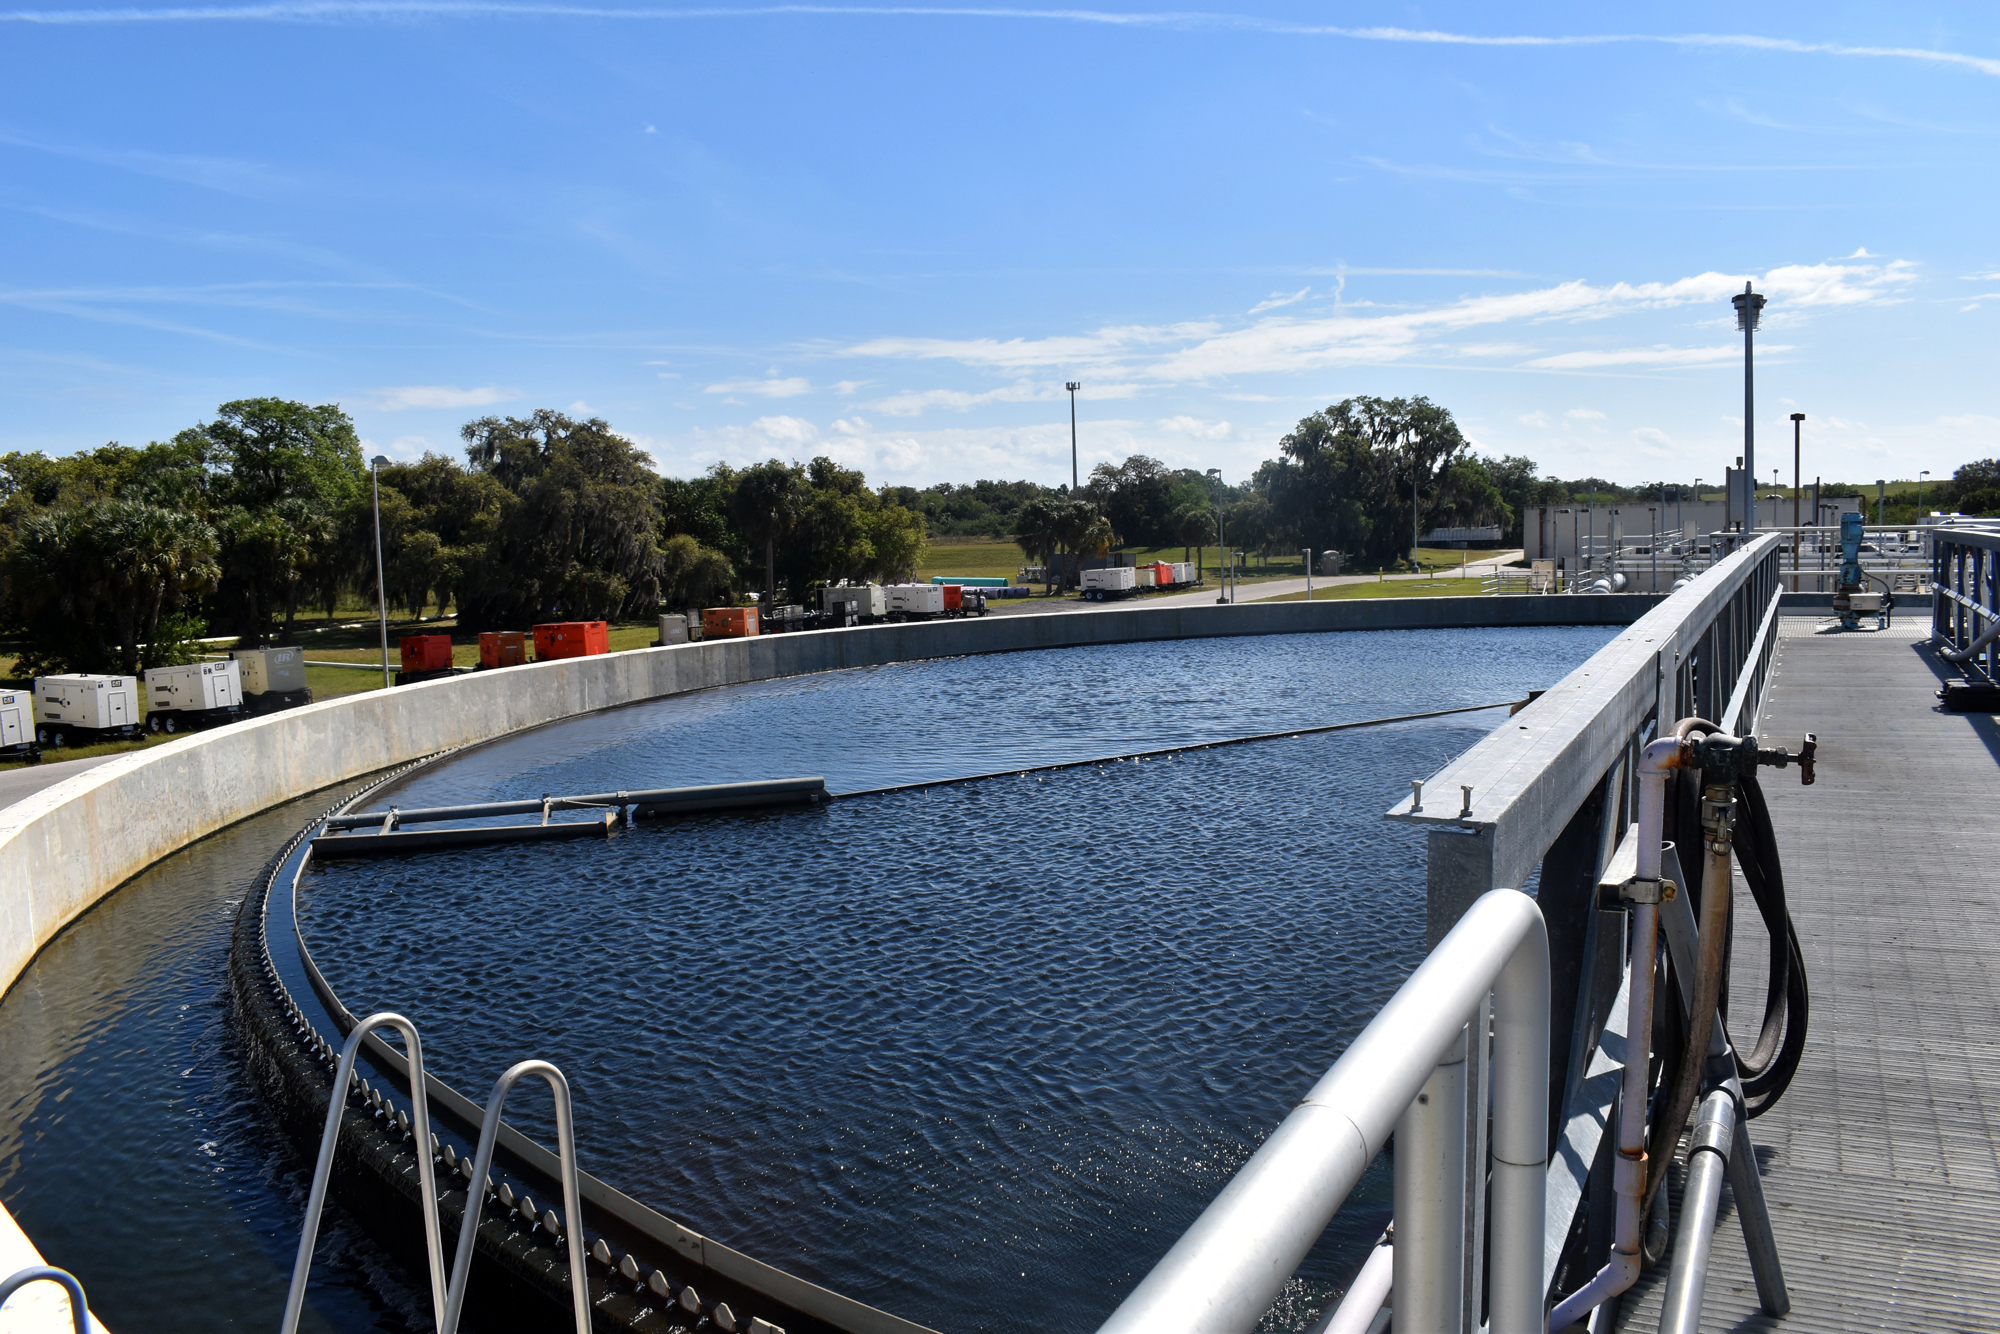 Water undergoes biological treatment at the facility, making it safe to water lawns with, but not to consume.